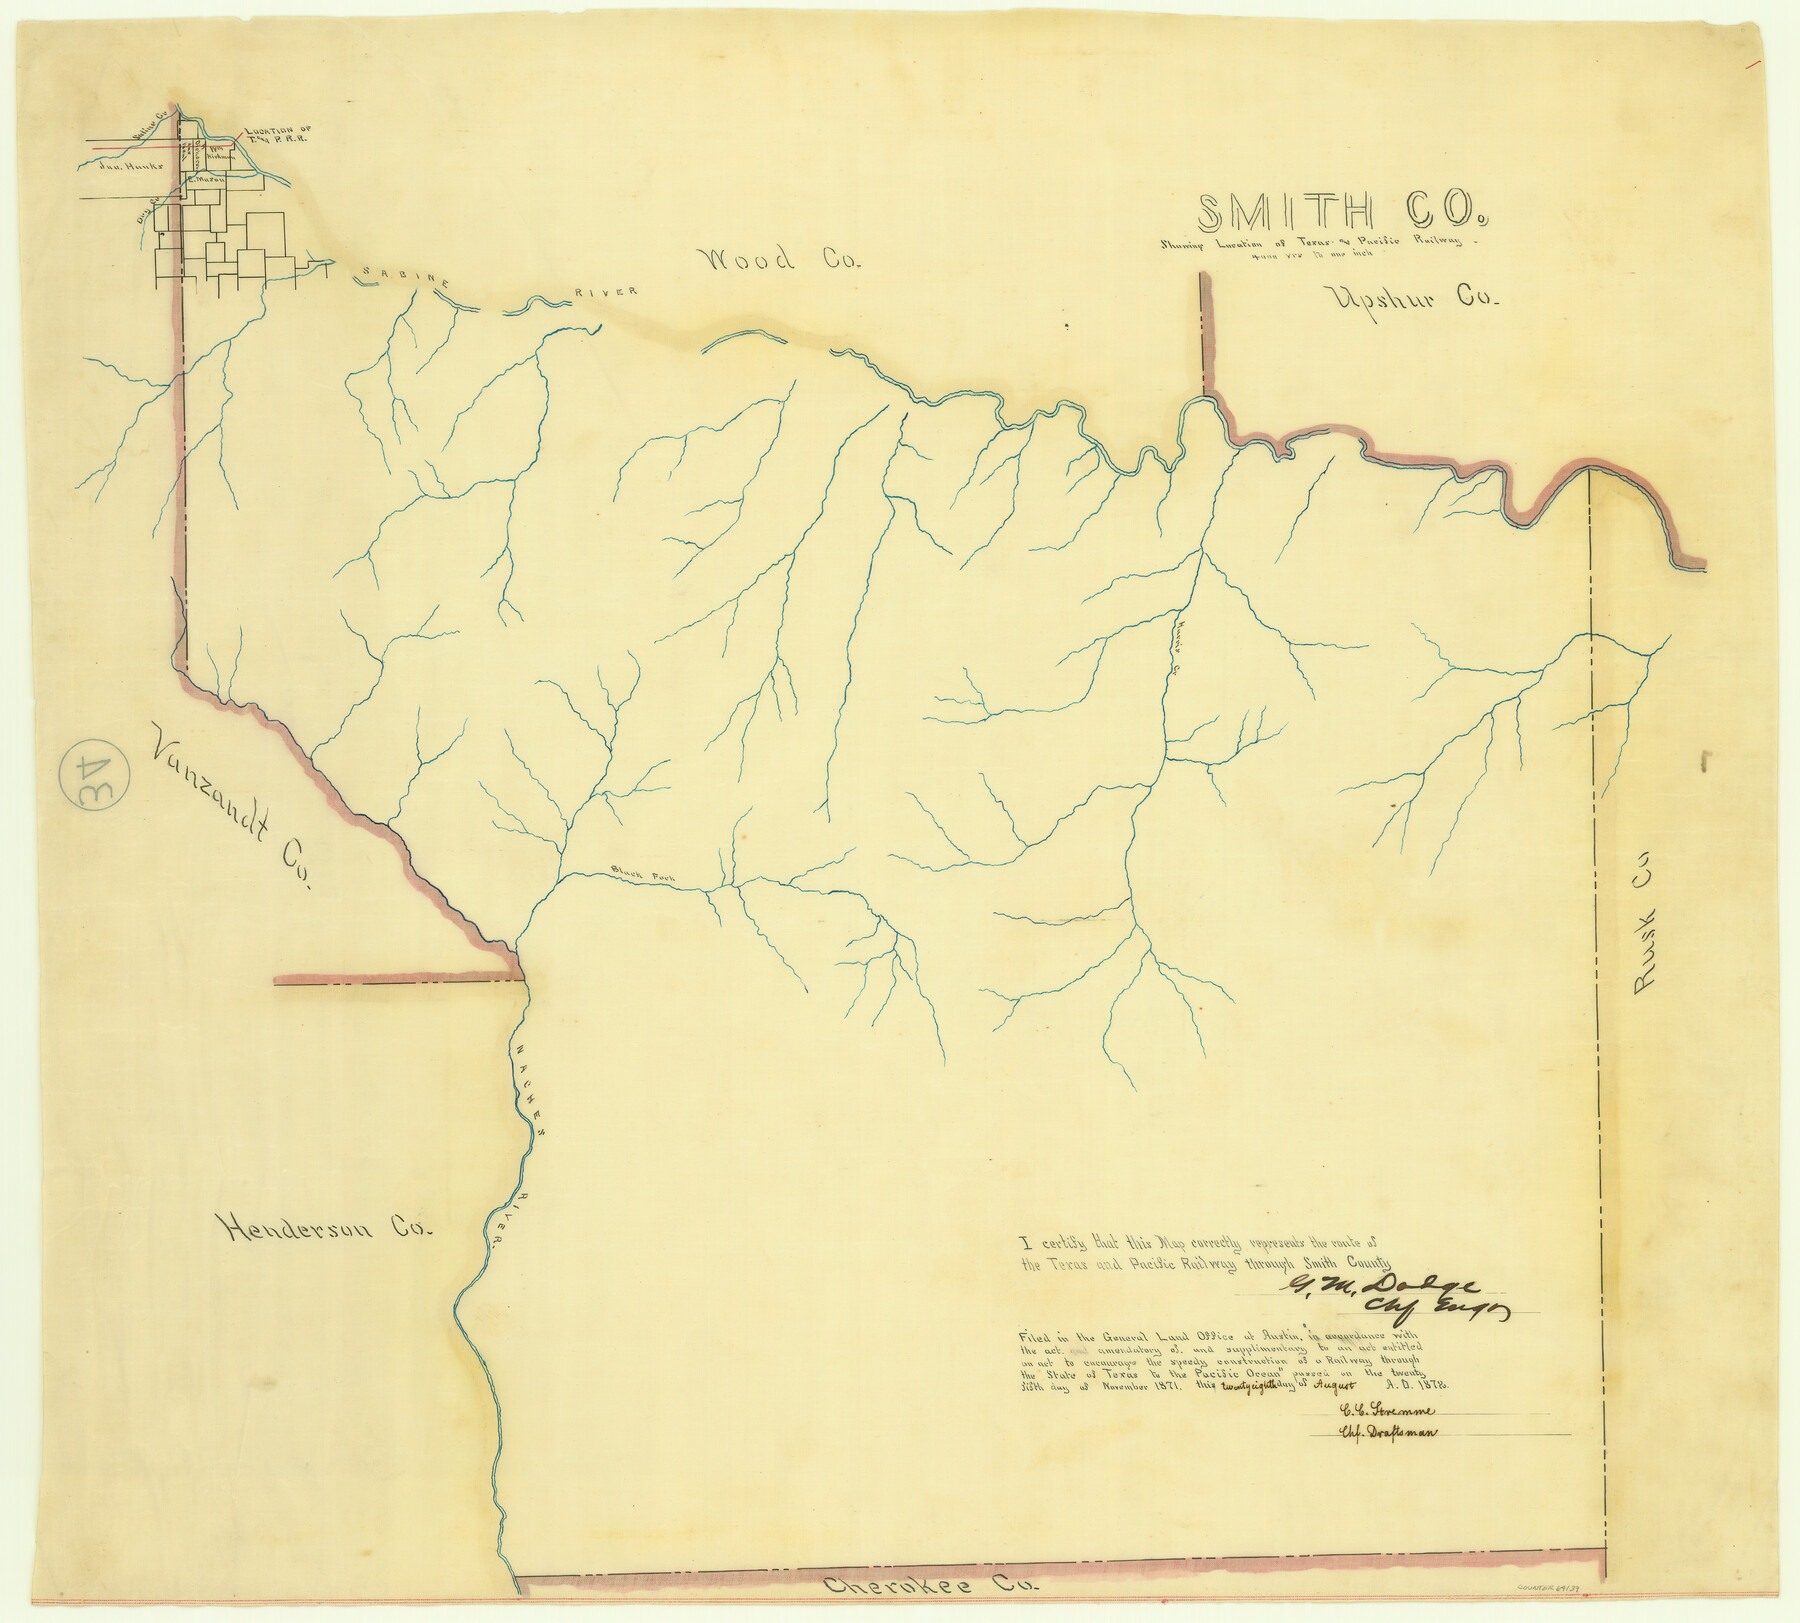 64139, Smith Co. showing location of Texas and Pacific Railway, General Map Collection